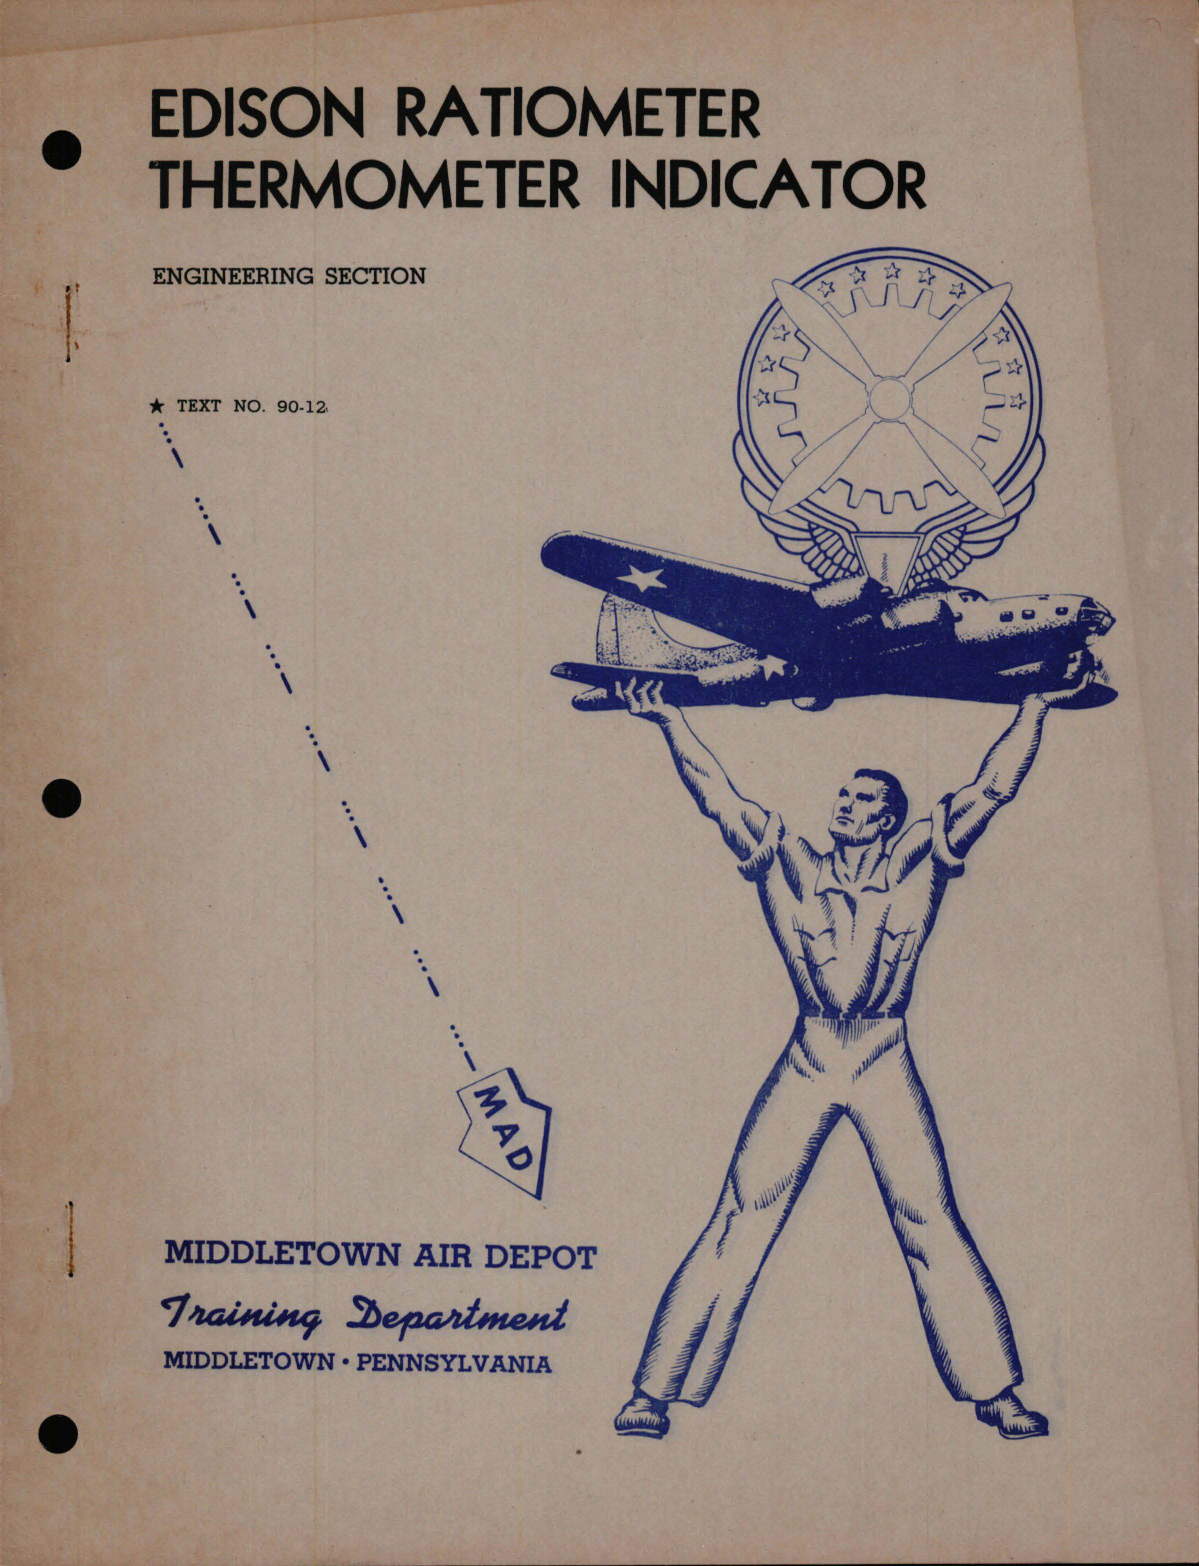 Sample page 1 from AirCorps Library document: Edison Ratiometer Thermometer Indicator Engineering Section